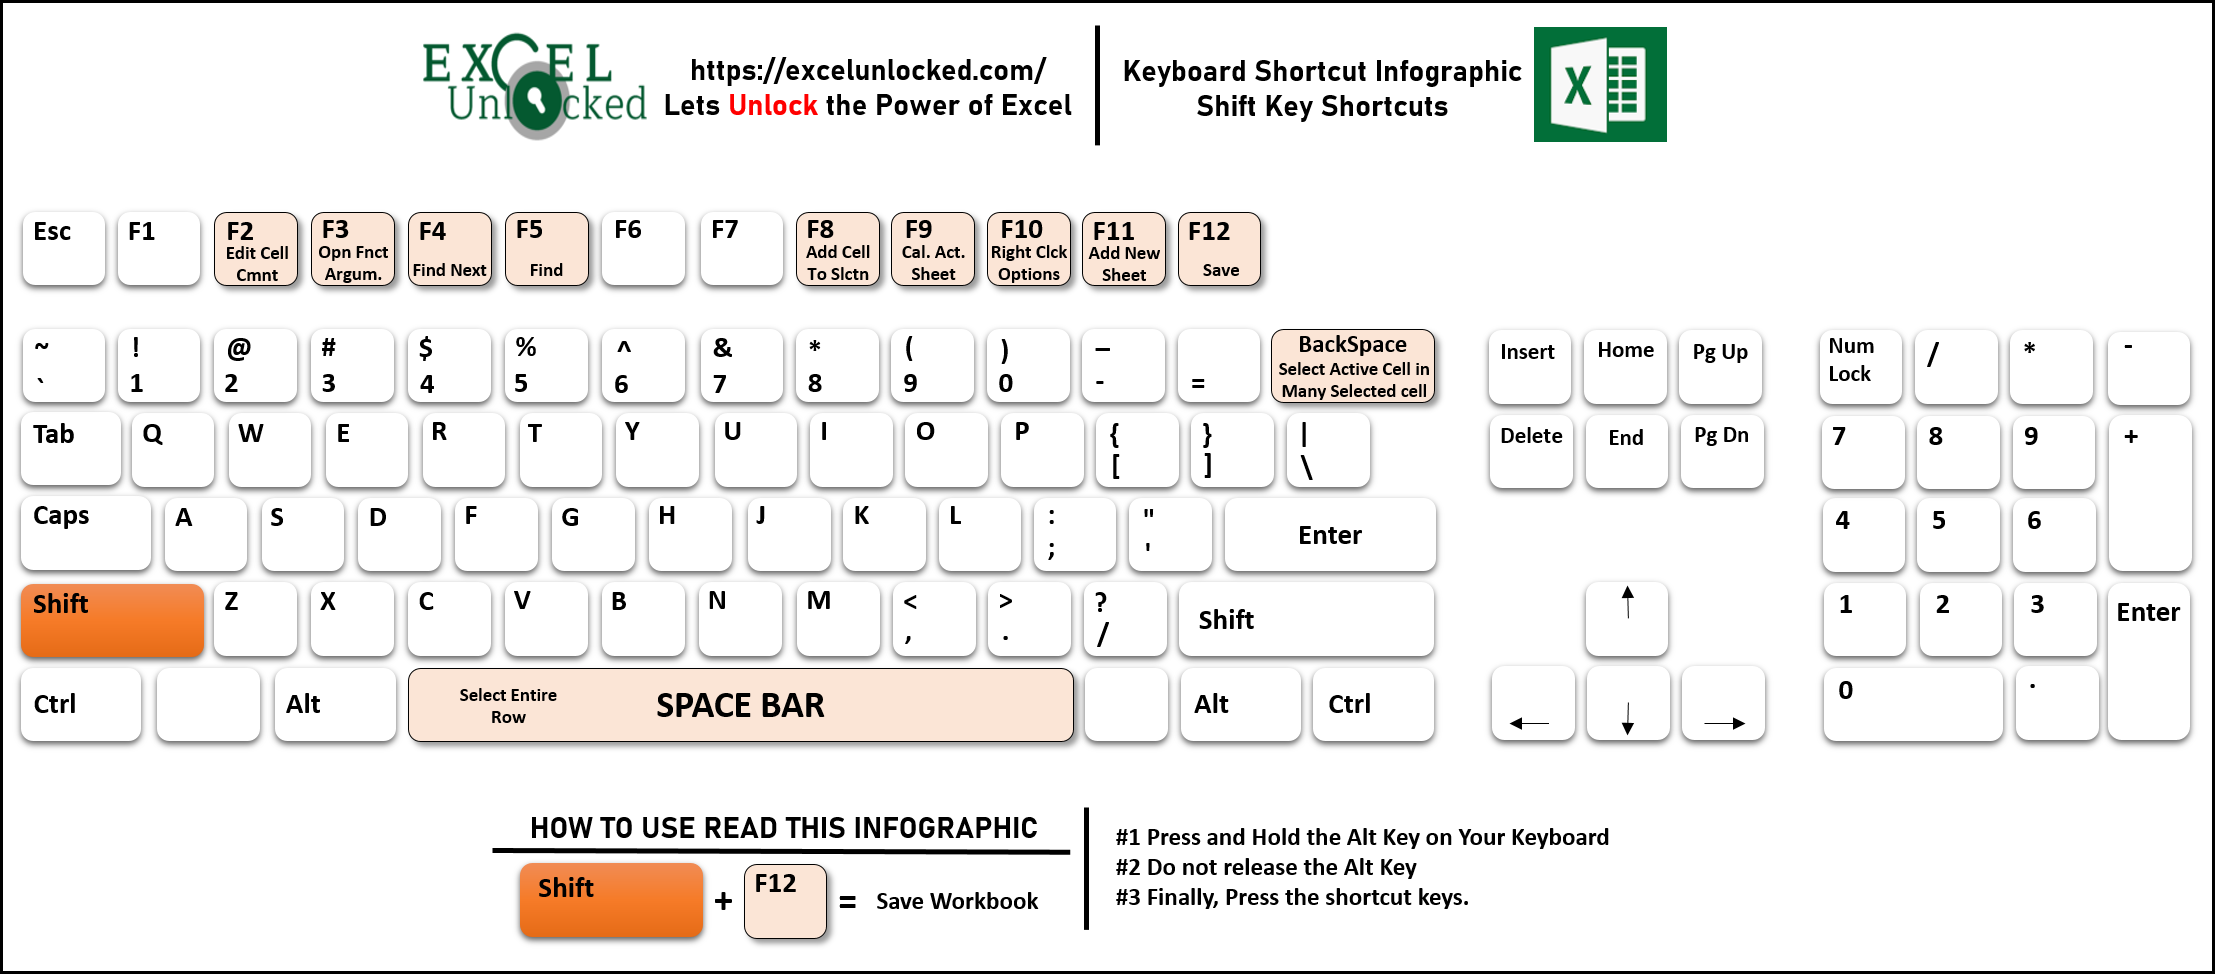 how to move selected cell in excel keyboard shortcut